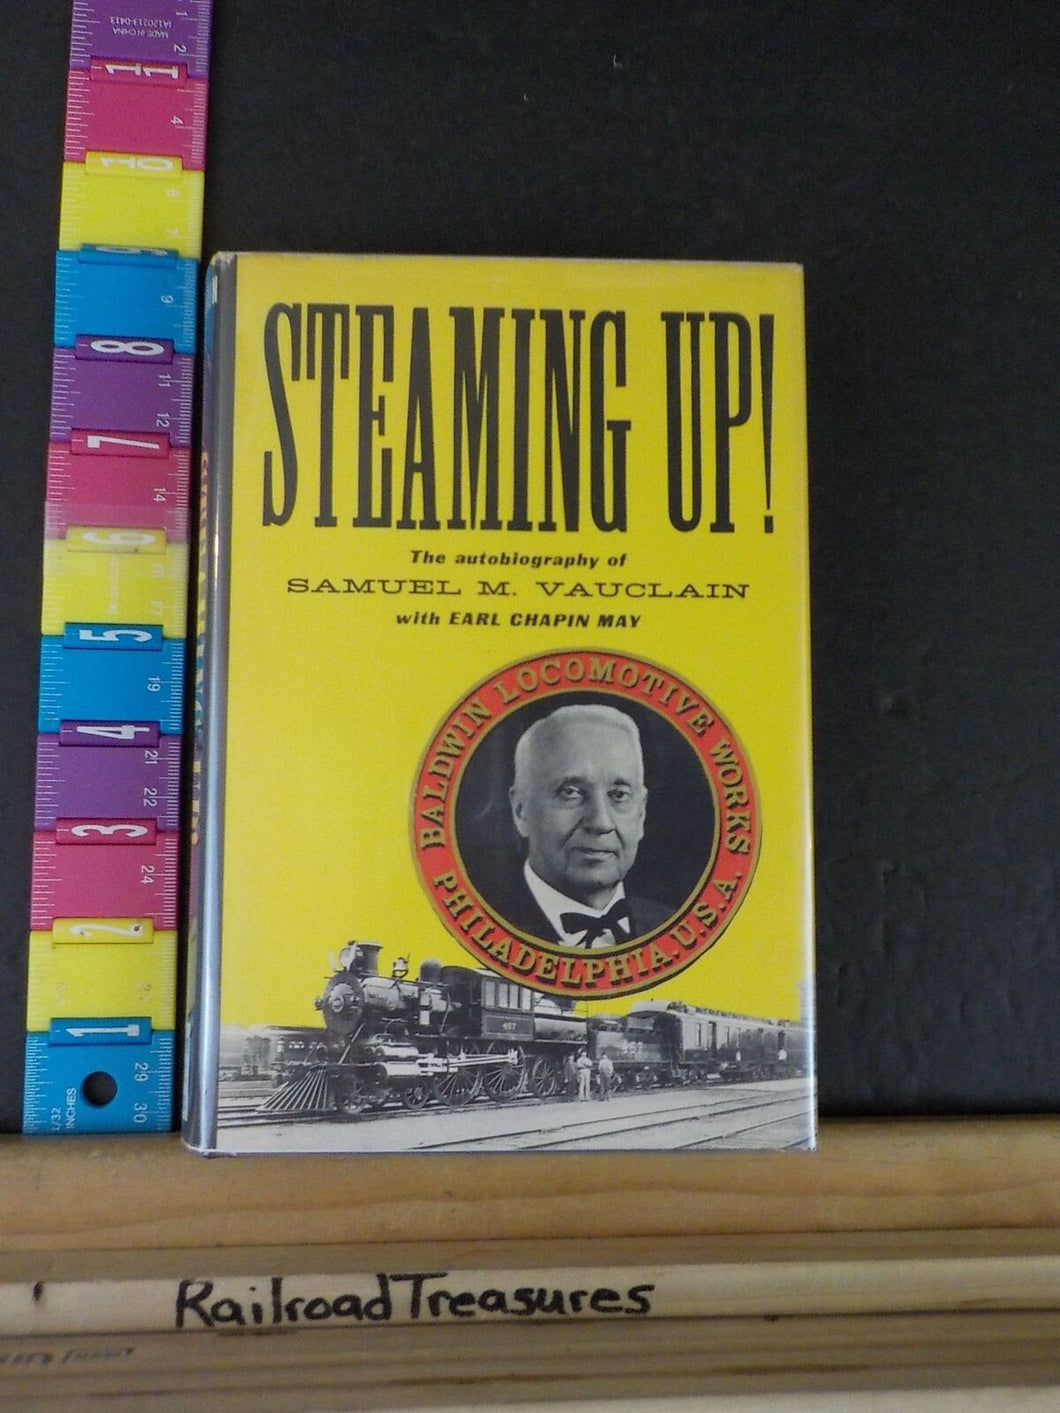 Steaming Up By Samuel Vauclain Autobiography     w/ dust jacket